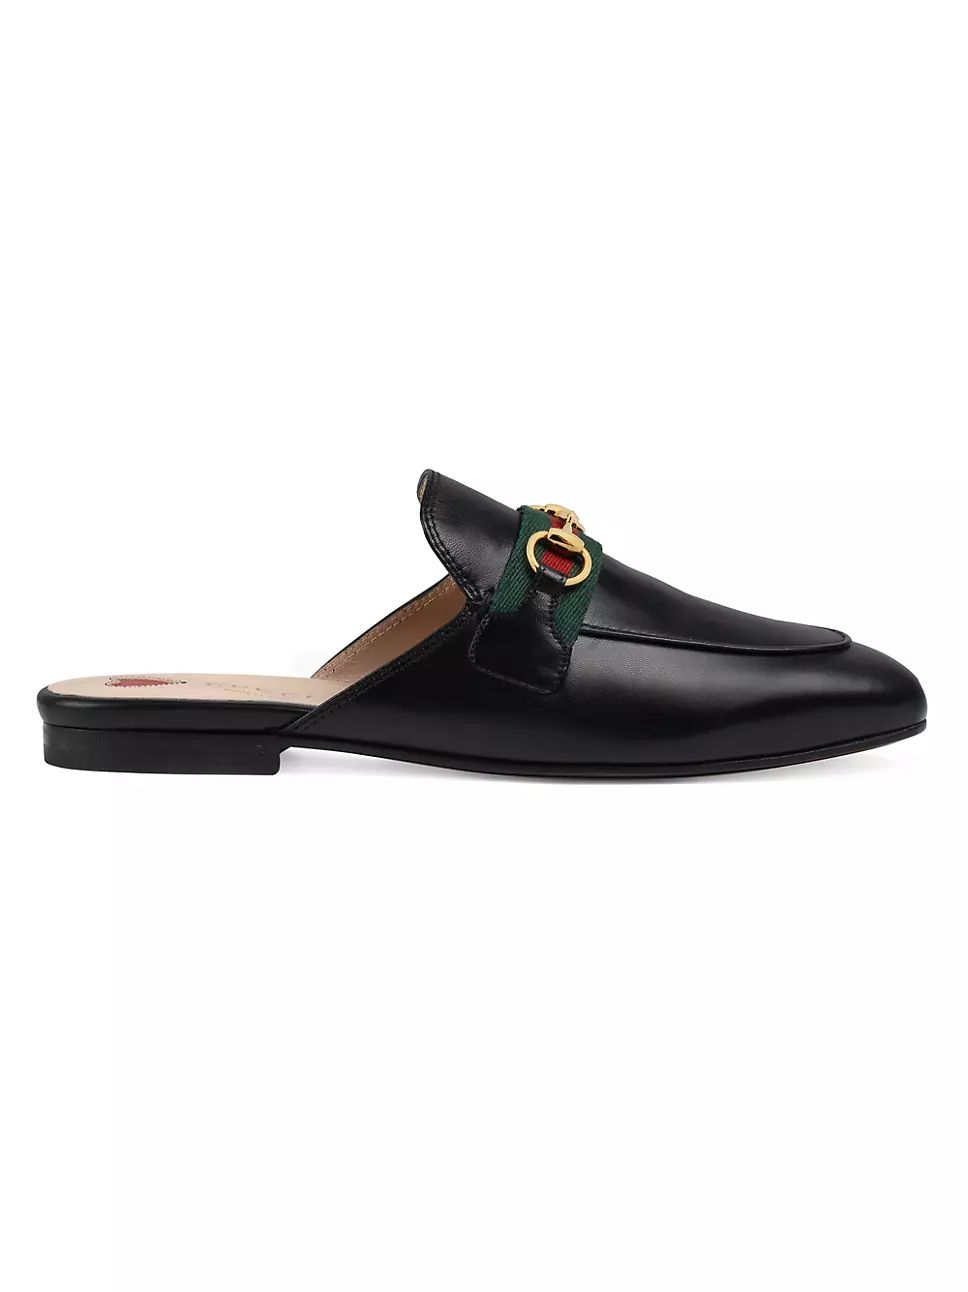 Women's Princetown Leather Slippers | Saks Fifth Avenue